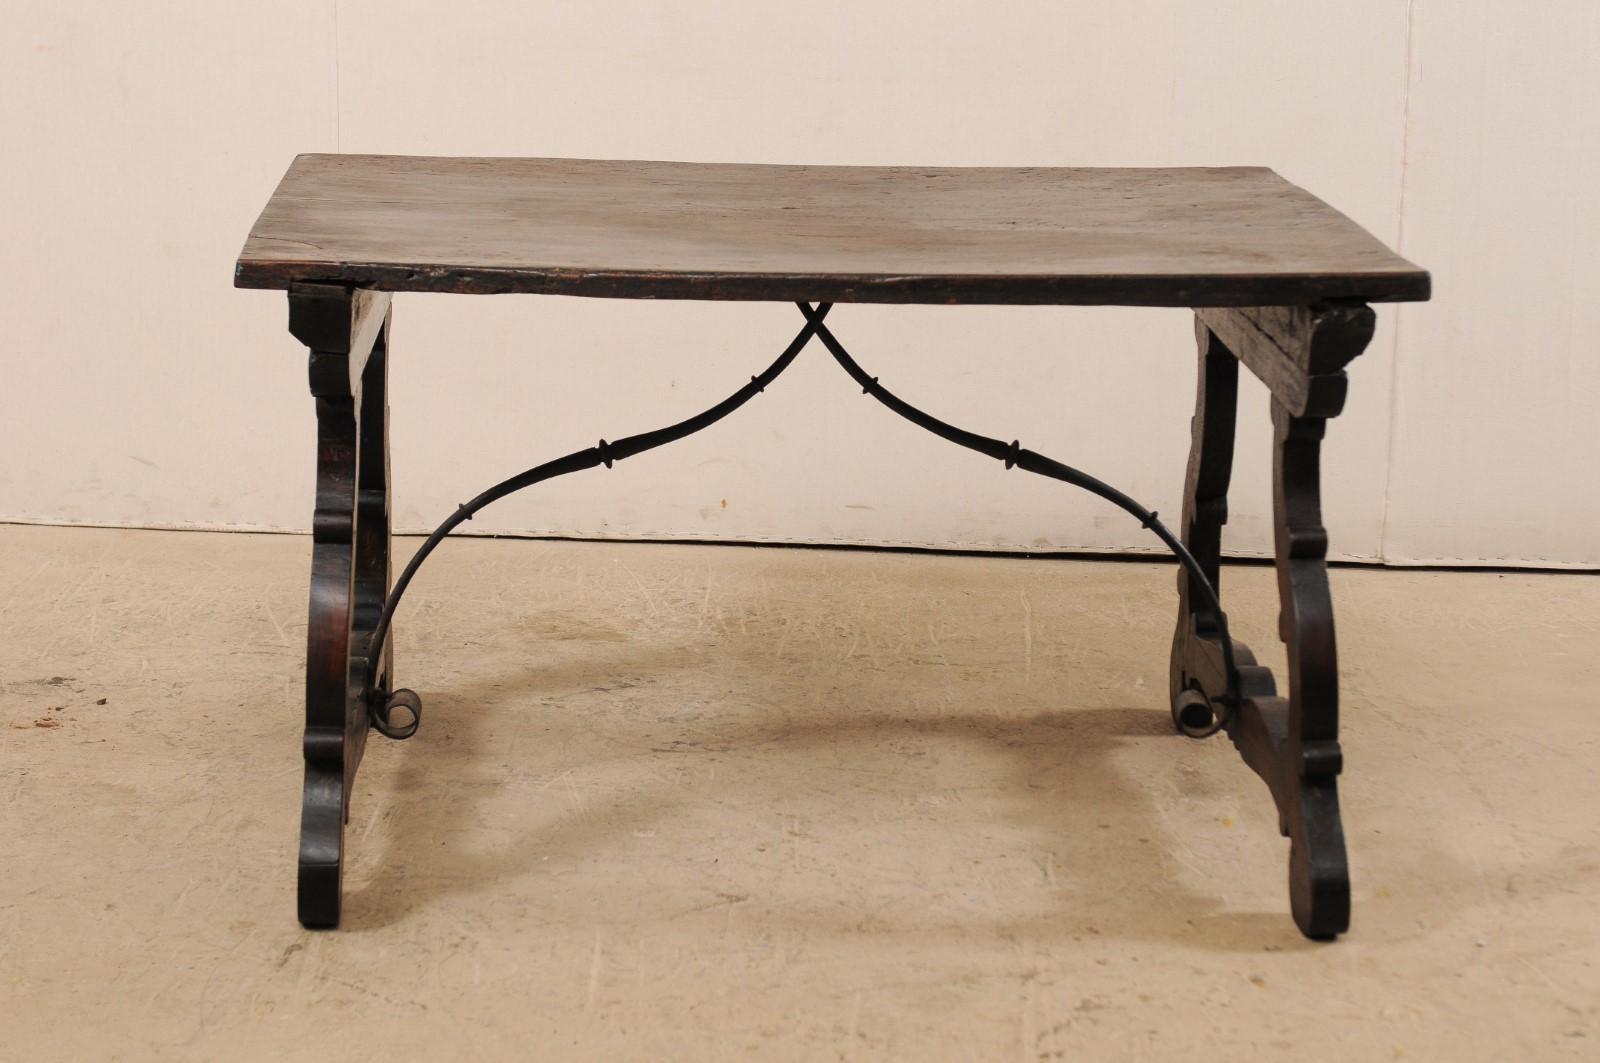 Italian An 18th Century Walnut Wood Trestle Table with Arched Iron Stretcher from Italy